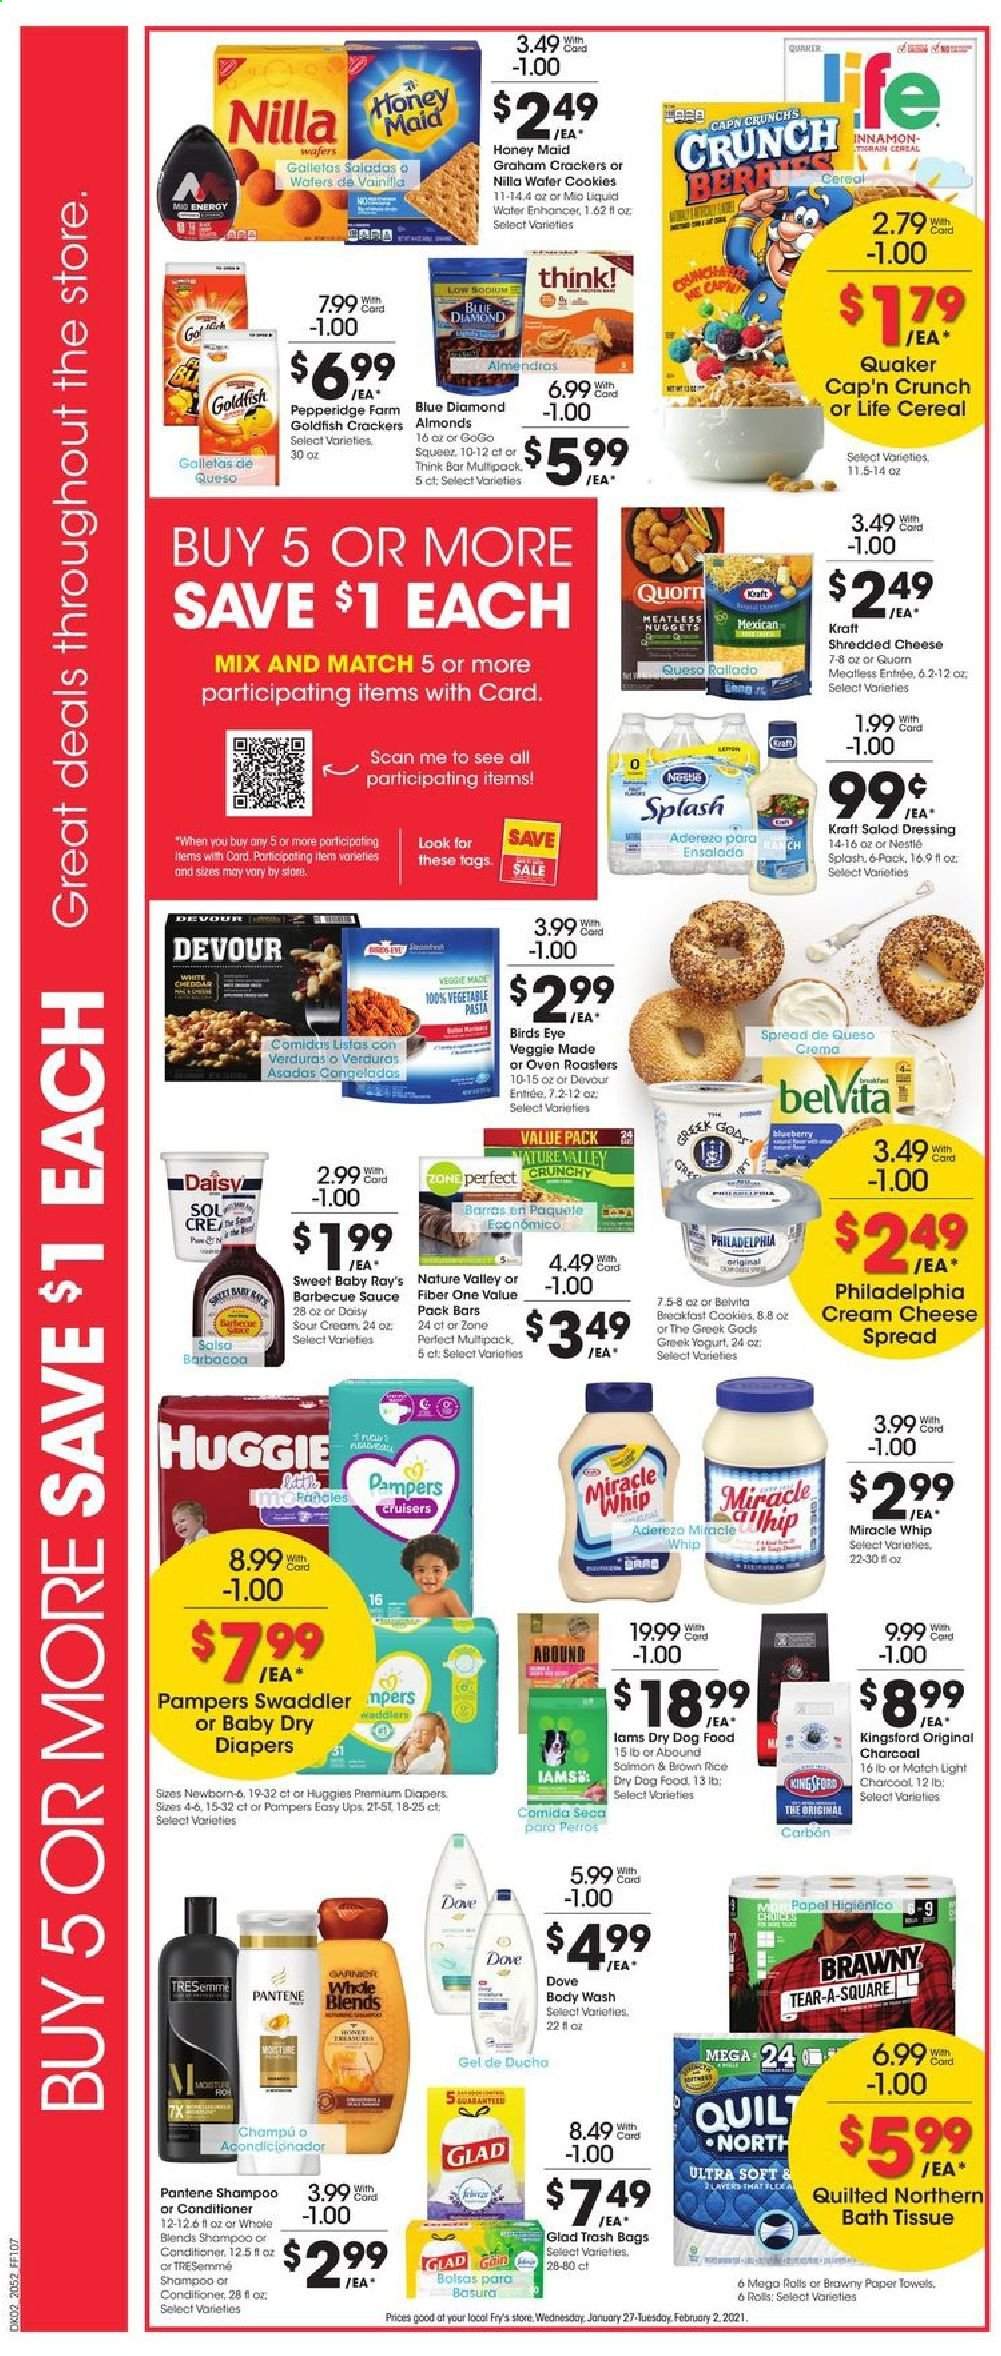 thumbnail - Fry’s Flyer - 01/27/2021 - 02/02/2021 - Sales products - cream cheese, sauce, Bird's Eye, Quaker, Kraft®, cheese spread, shredded cheese, Philadelphia, greek yoghurt, yoghurt, sour cream, Miracle Whip, salsa, Devour, cookies, graham crackers, Nestlé, wafers, crackers, Goldfish, cereals, Cap'n Crunch, belVita, Honey Maid, Nature Valley, Fiber One, Zone Perfect, brown rice, rice, pasta, BBQ sauce, salad dressing, dressing, almonds, Blue Diamond, Sol, Huggies, Pampers, Dove, bath tissue, Quilted Northern, kitchen towels, paper towels, Gain, body wash, shampoo, conditioner, TRESemmé, Pantene, trash bags, quilt, animal food, dog food, dry dog food, oven. Page 3.